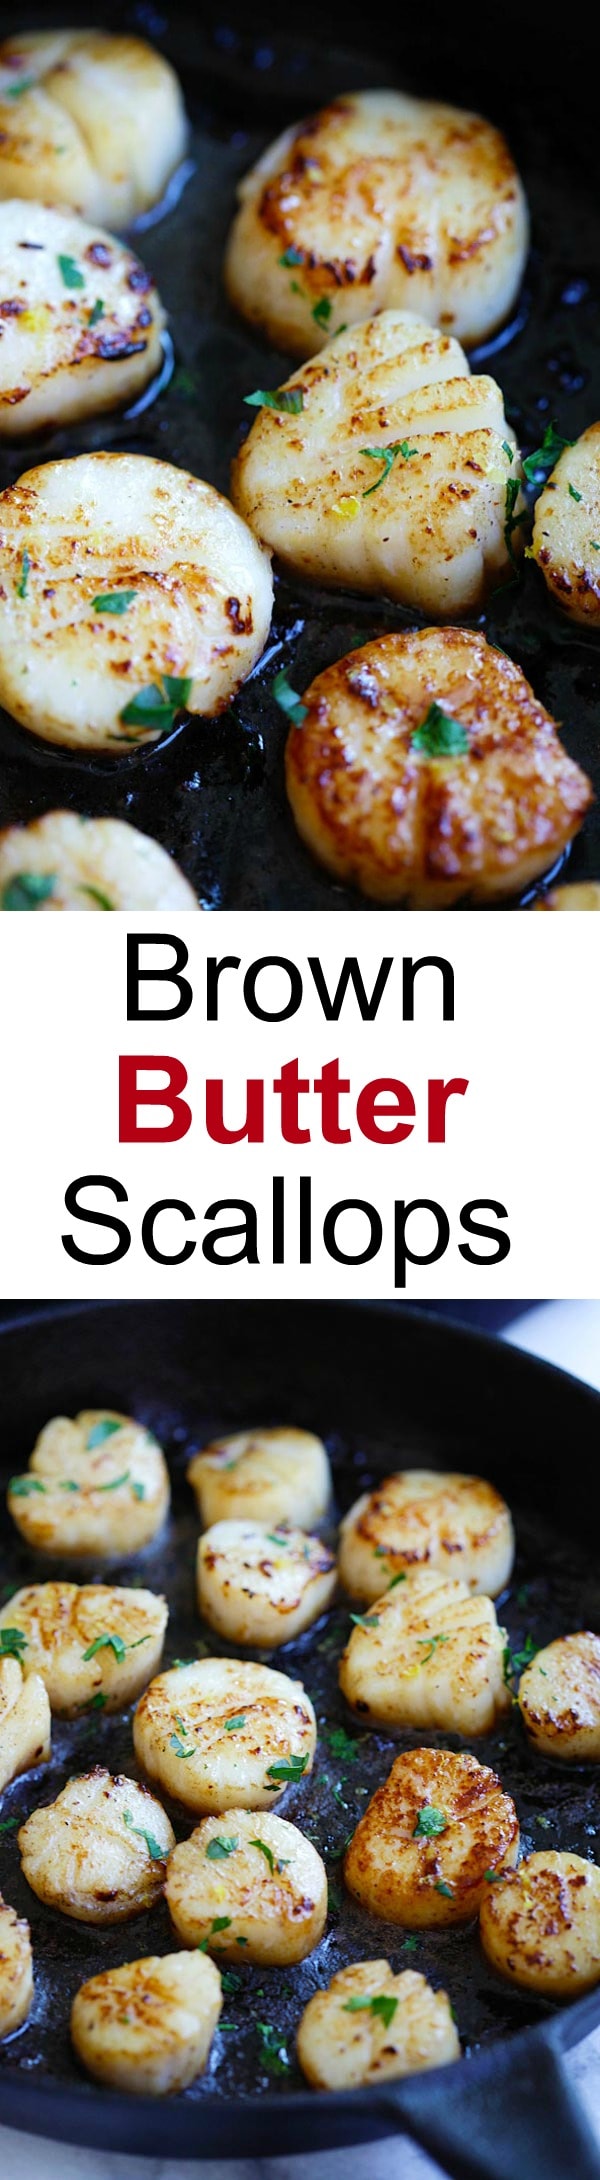 Brown Butter Scallops – perfectly seared scallops using brown butter. Juicy scallops that pair well with pasta. 10 mins to cook | rasamalaysia.com